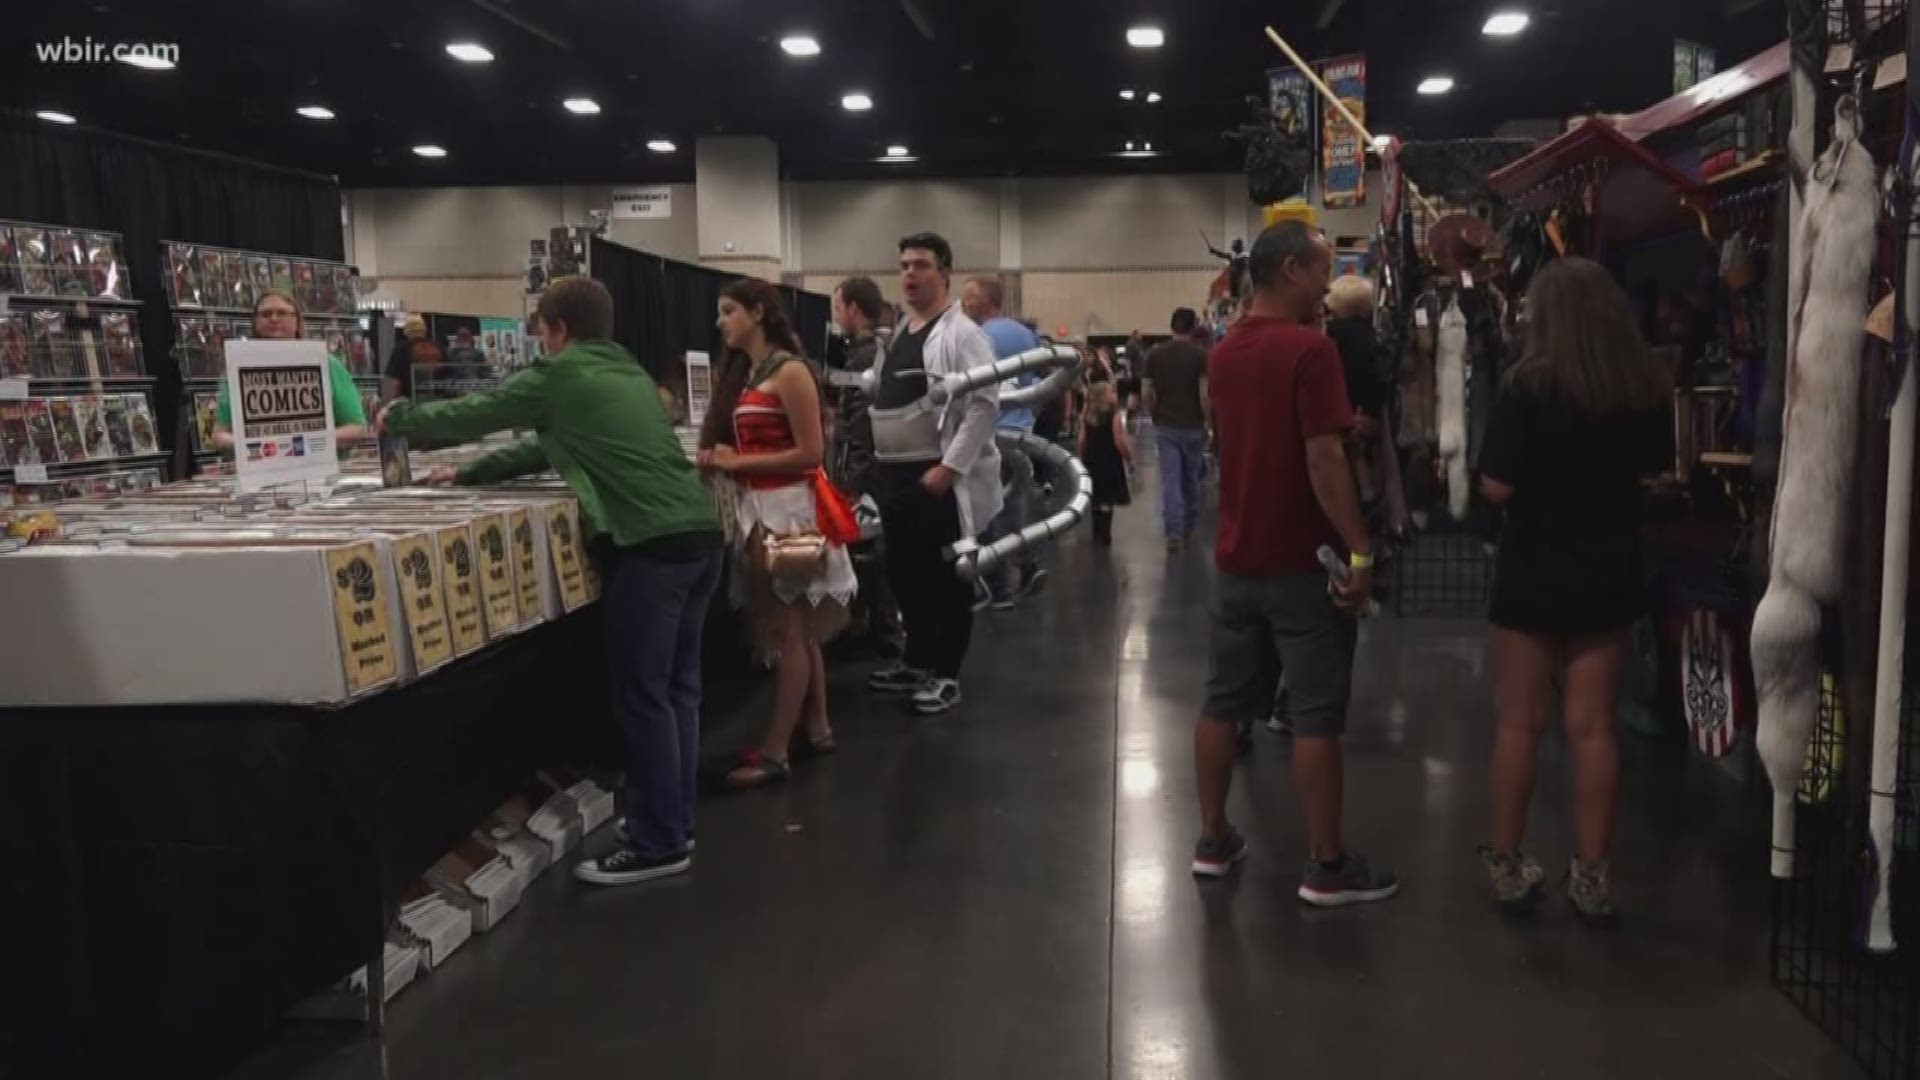 The weekend-long pop-culture event attracts thousands of comic fans and cosplayers.